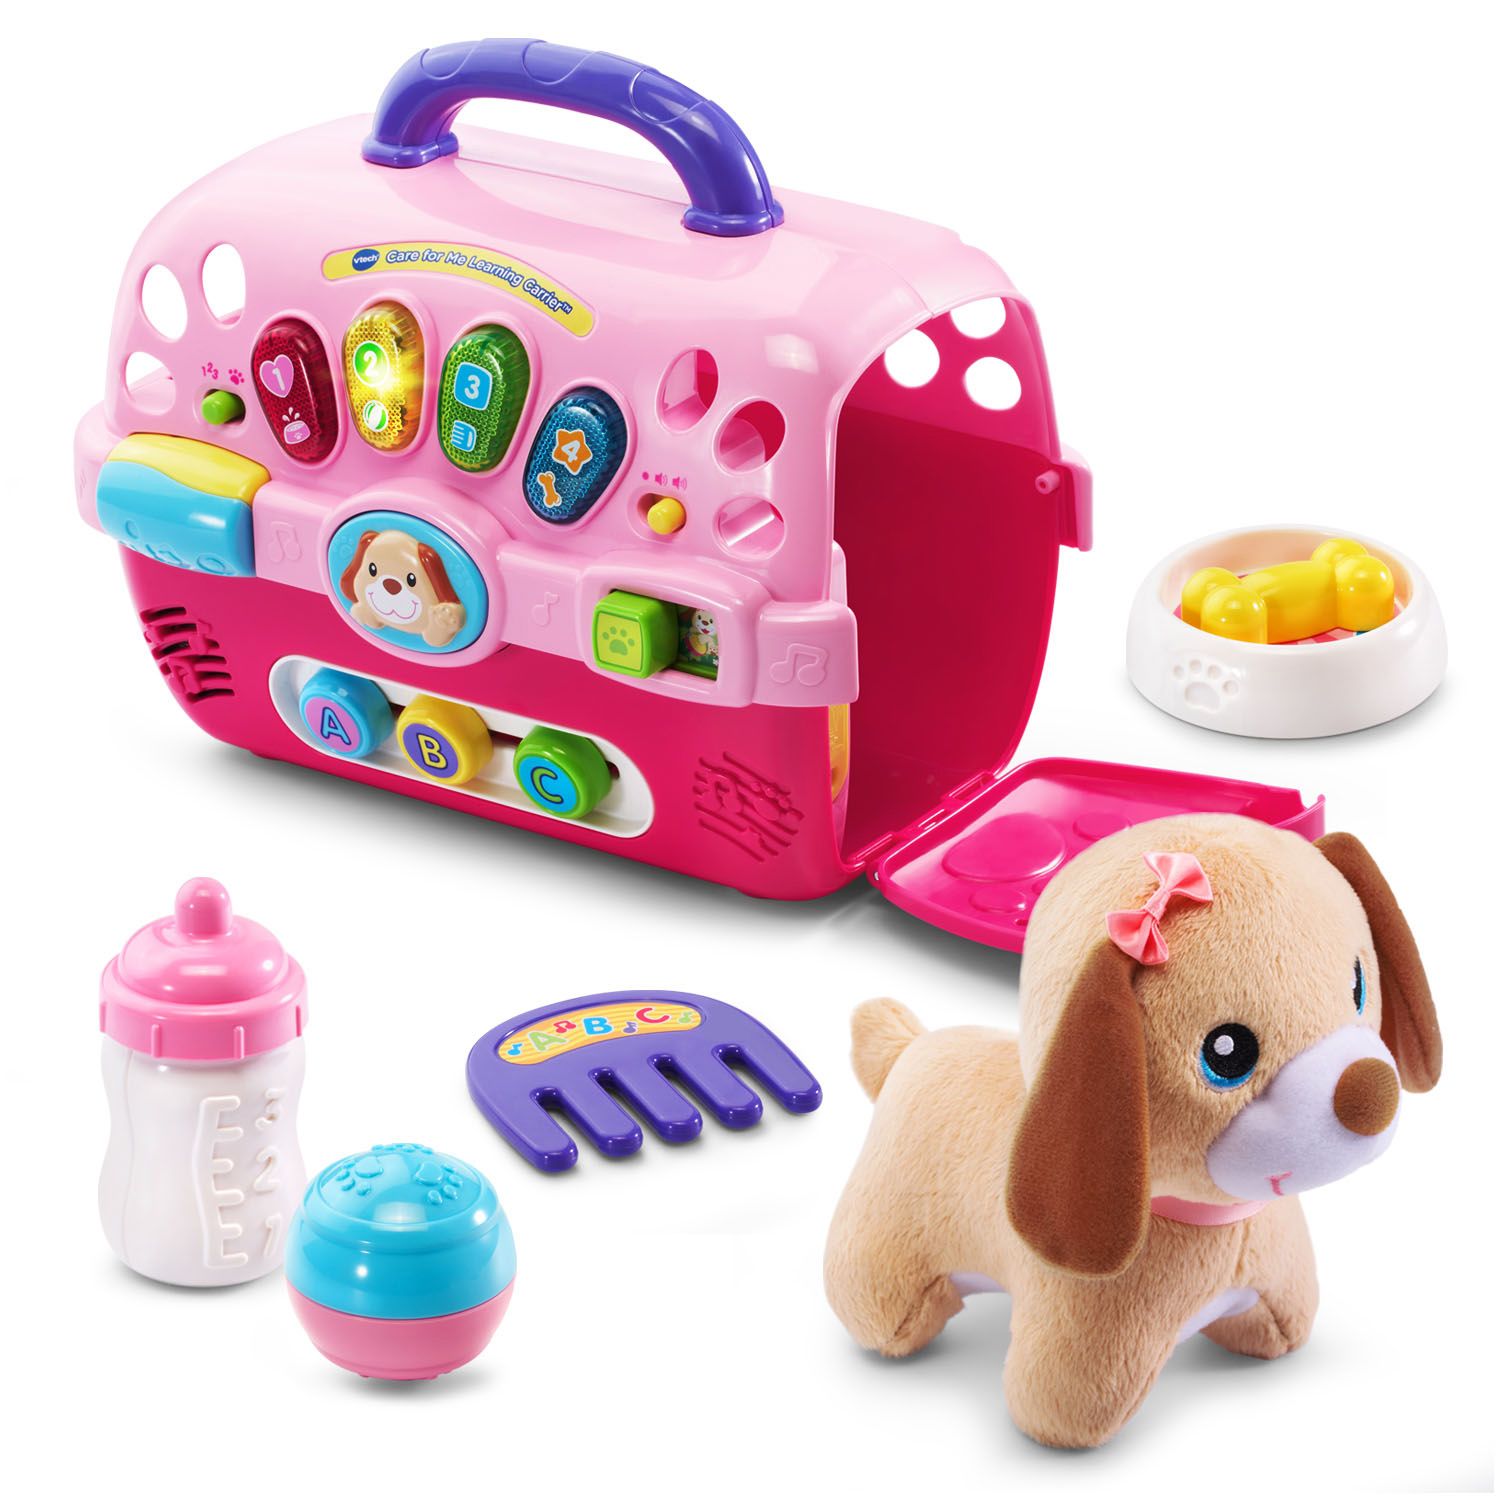 vtech laugh and learn puppy